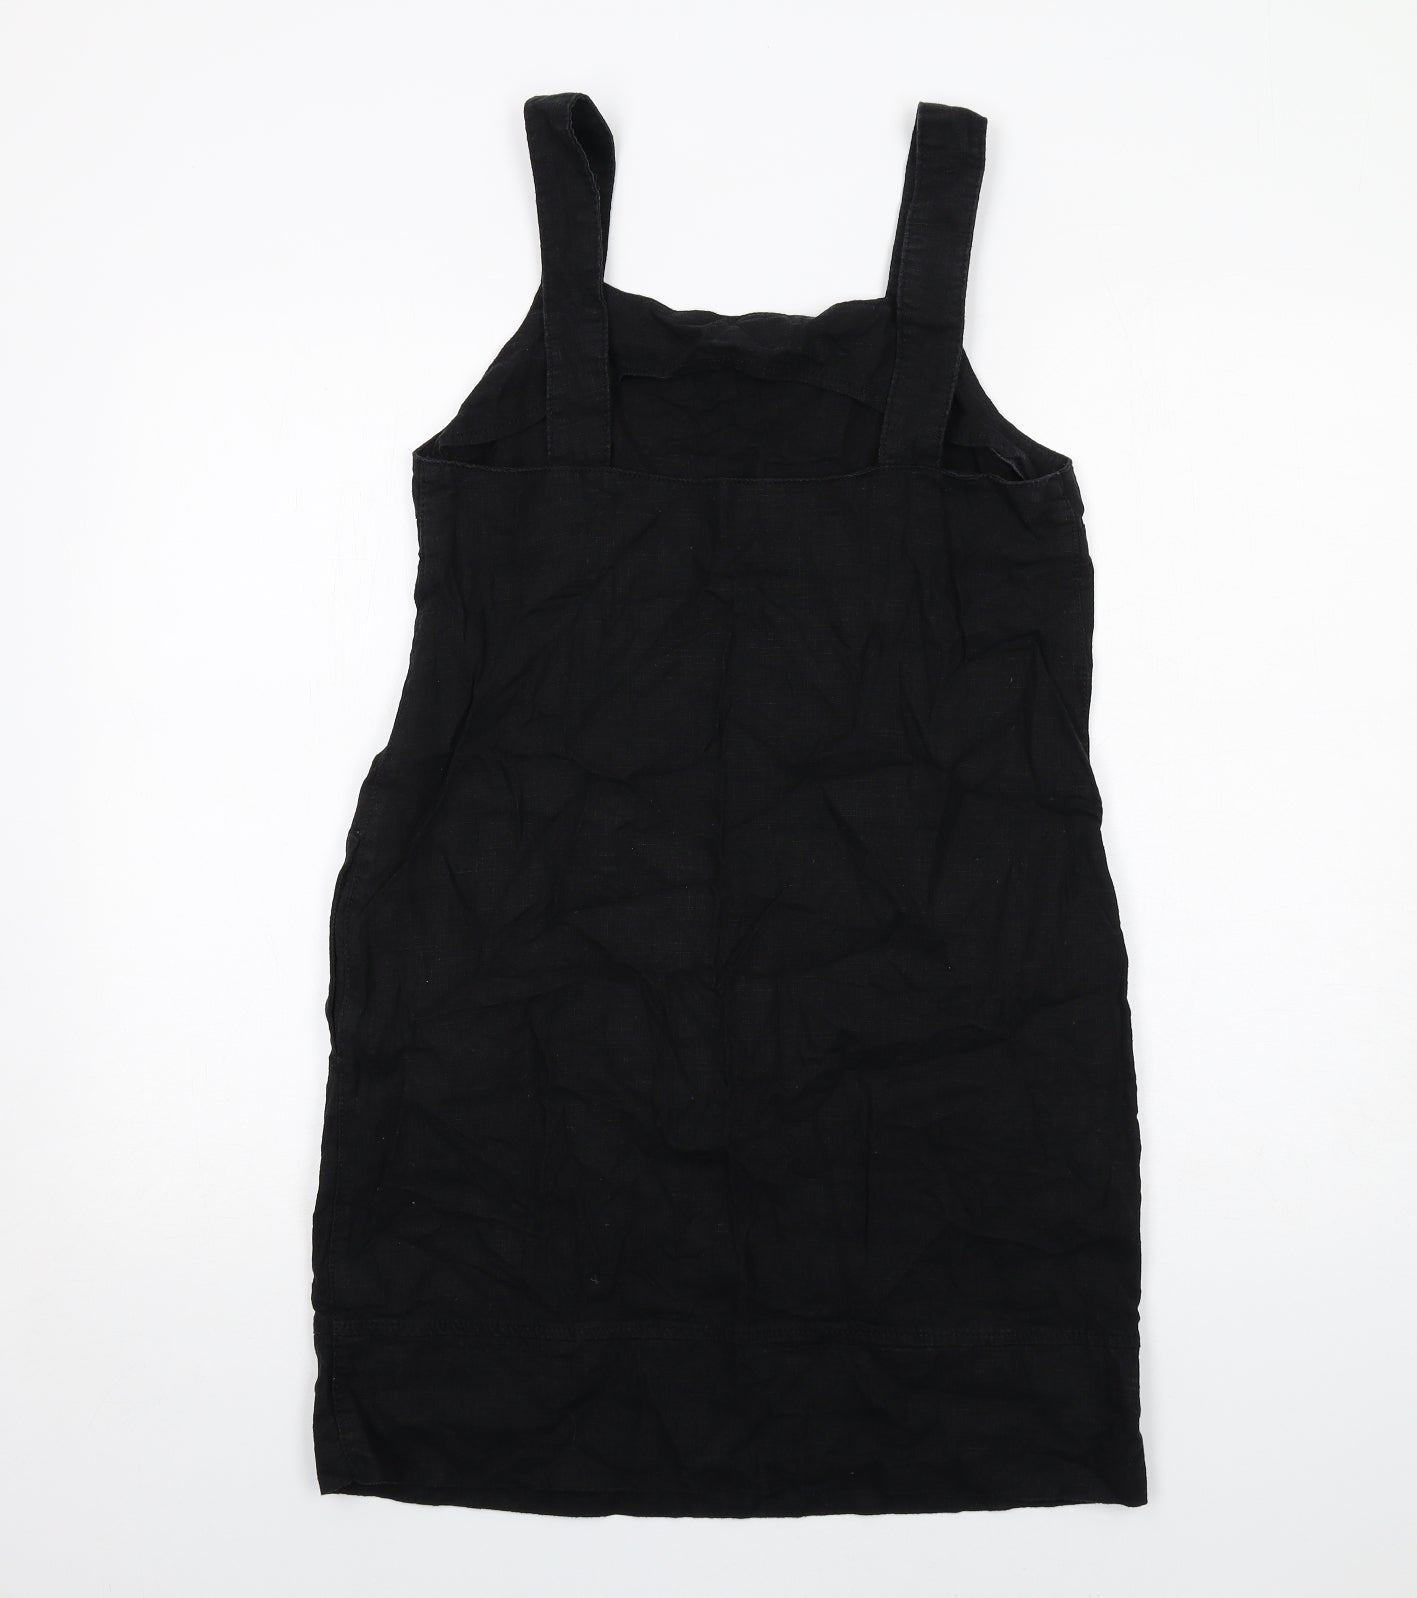 NEXT Womens Black Linen Pinafore/Dungaree Dress Size 12 Square Neck Pullover